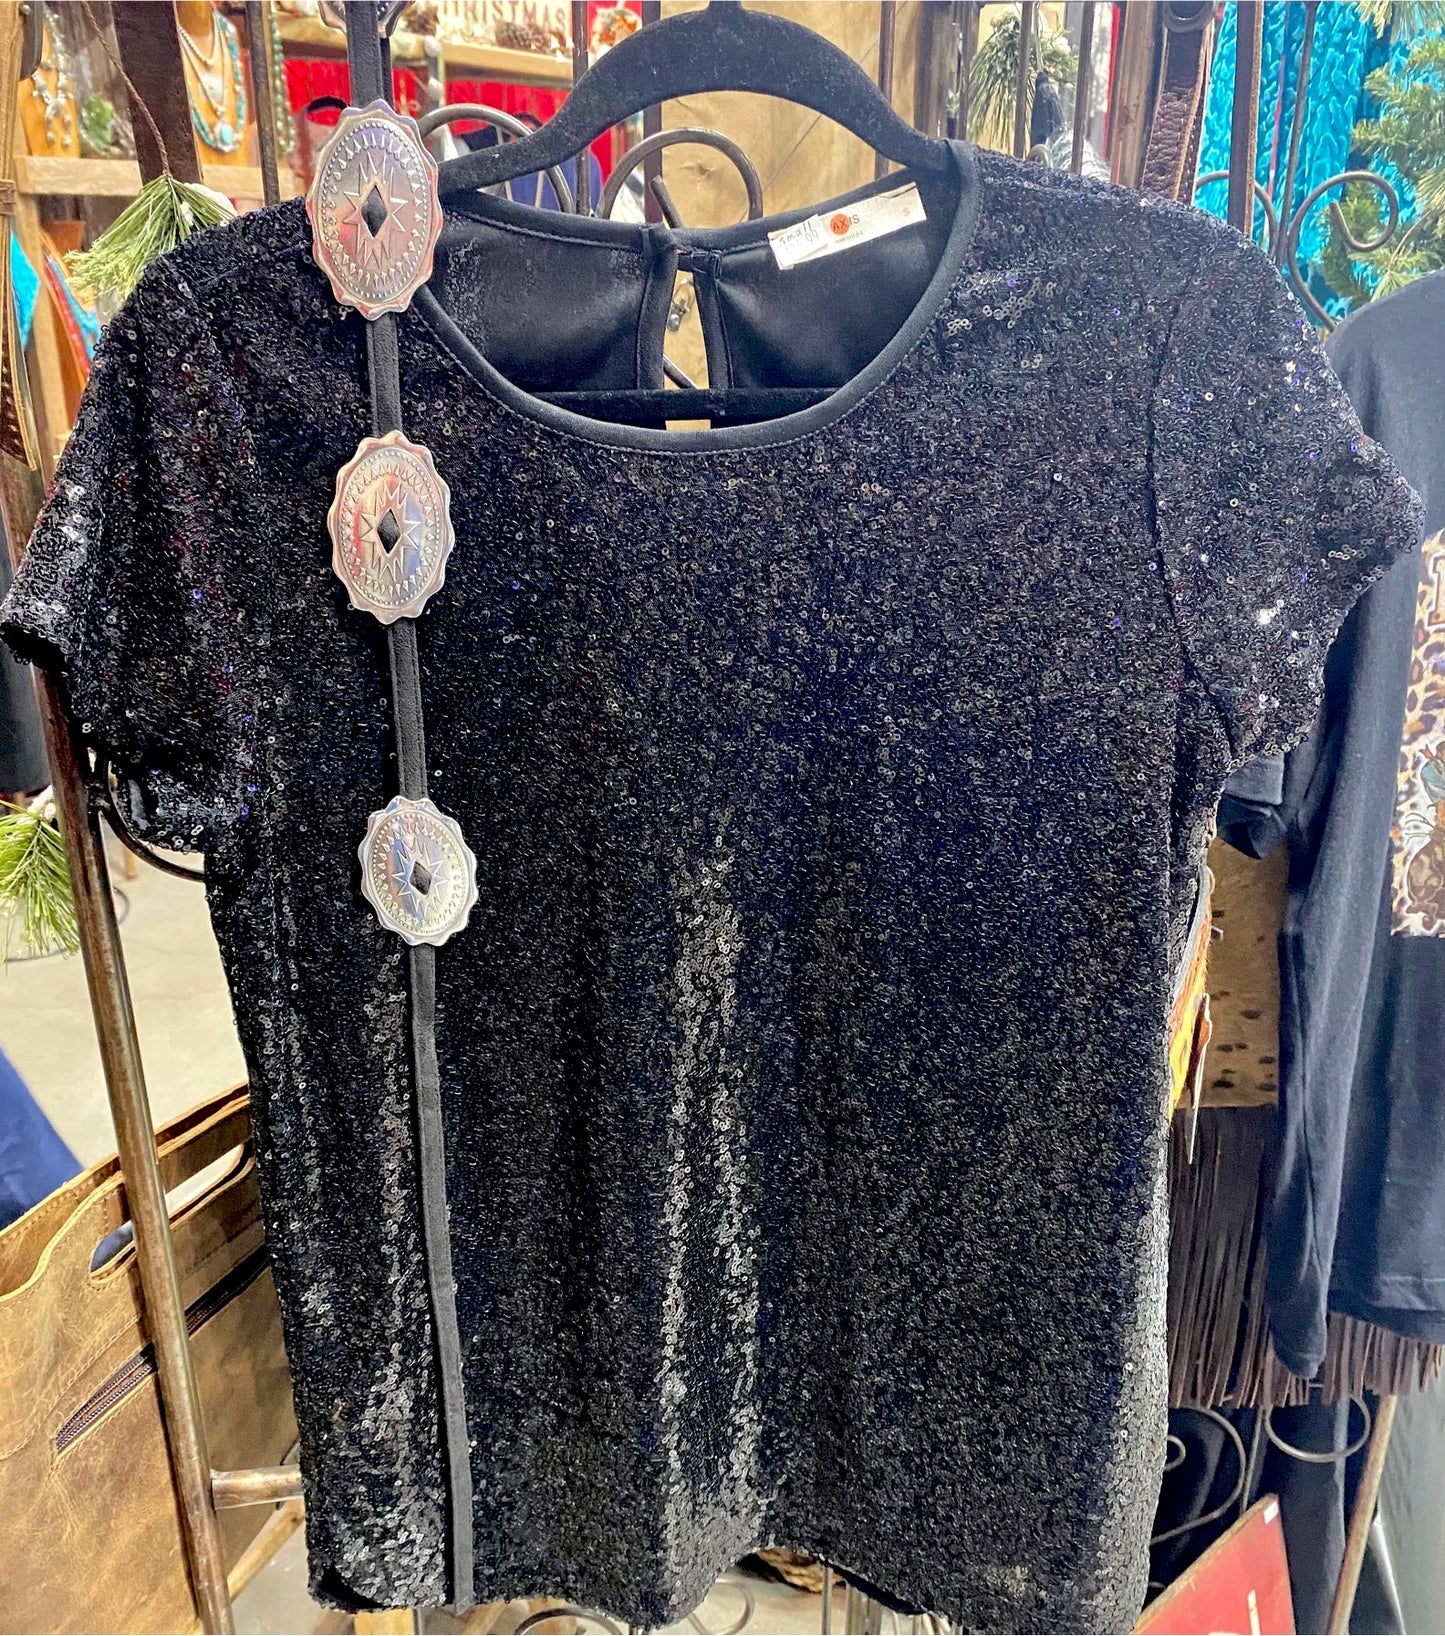 Black sequin fully lined top. This top is so sparkly and the perfect bit of glam to add in to your wardrobe. Style it alone or with a fun jacket or vest at your next night out on the town or celebration. Made in the USA!   Sizing Information:   Fabric: 95% Polyester 5% Spandex   Runs True To Size   Small - 2/4 Medium - 6/8 Large - 10/12 XL - 12/14